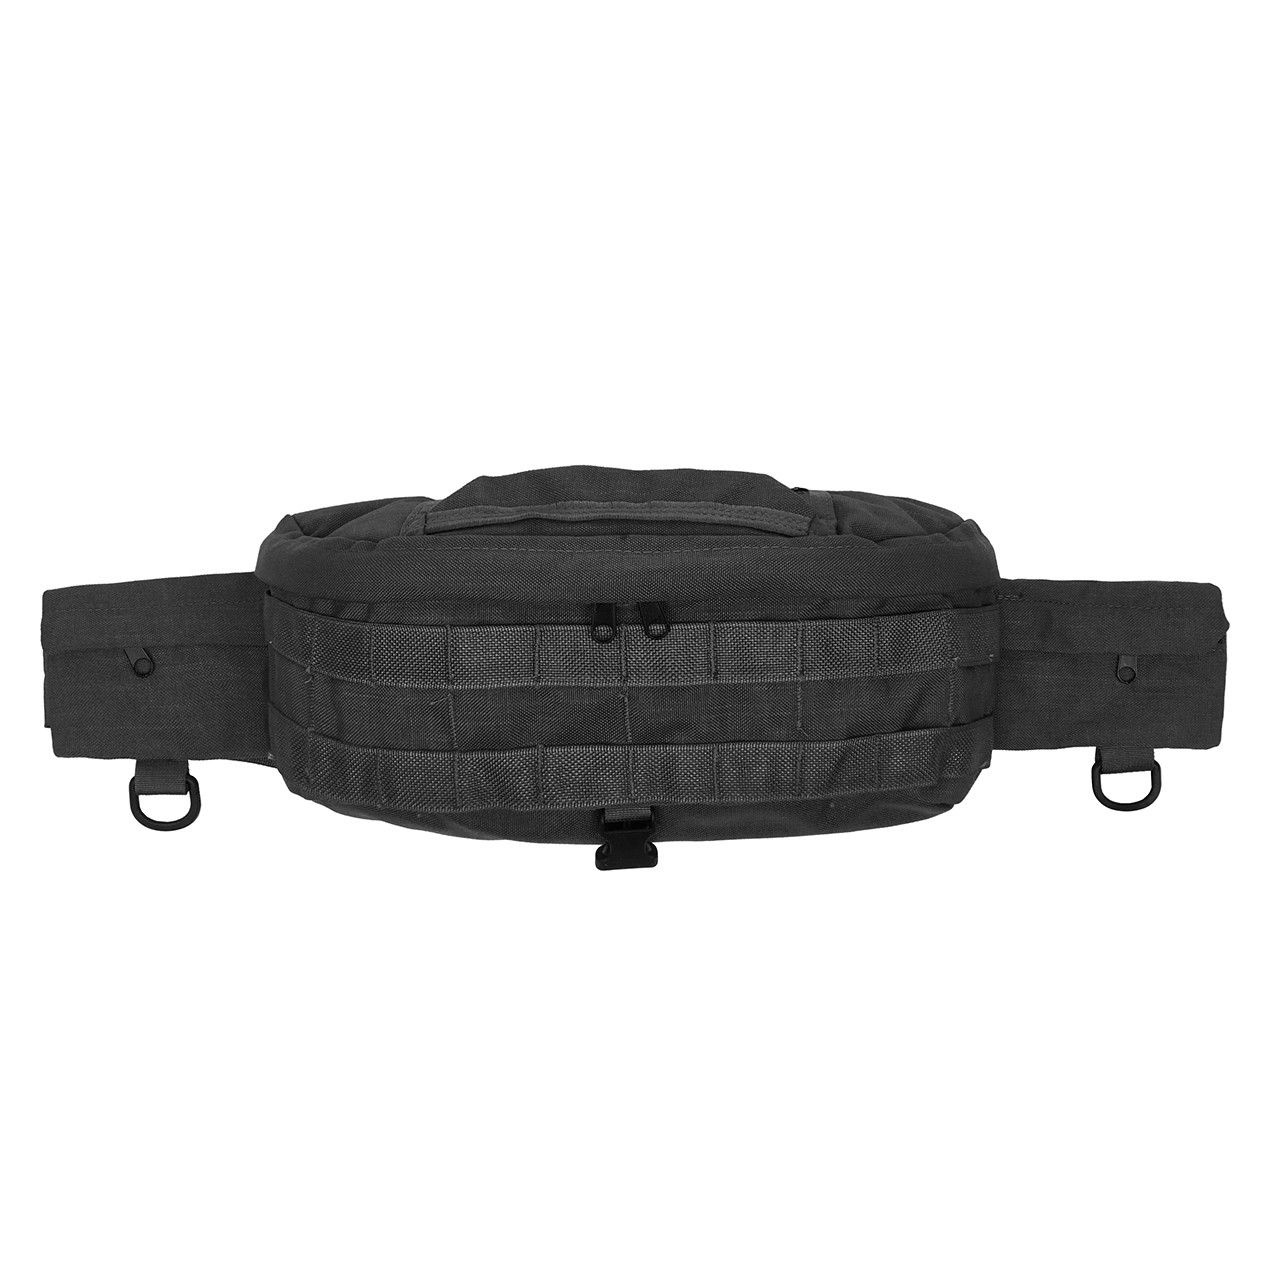 50430 UNIVERSAL FANNY PACK